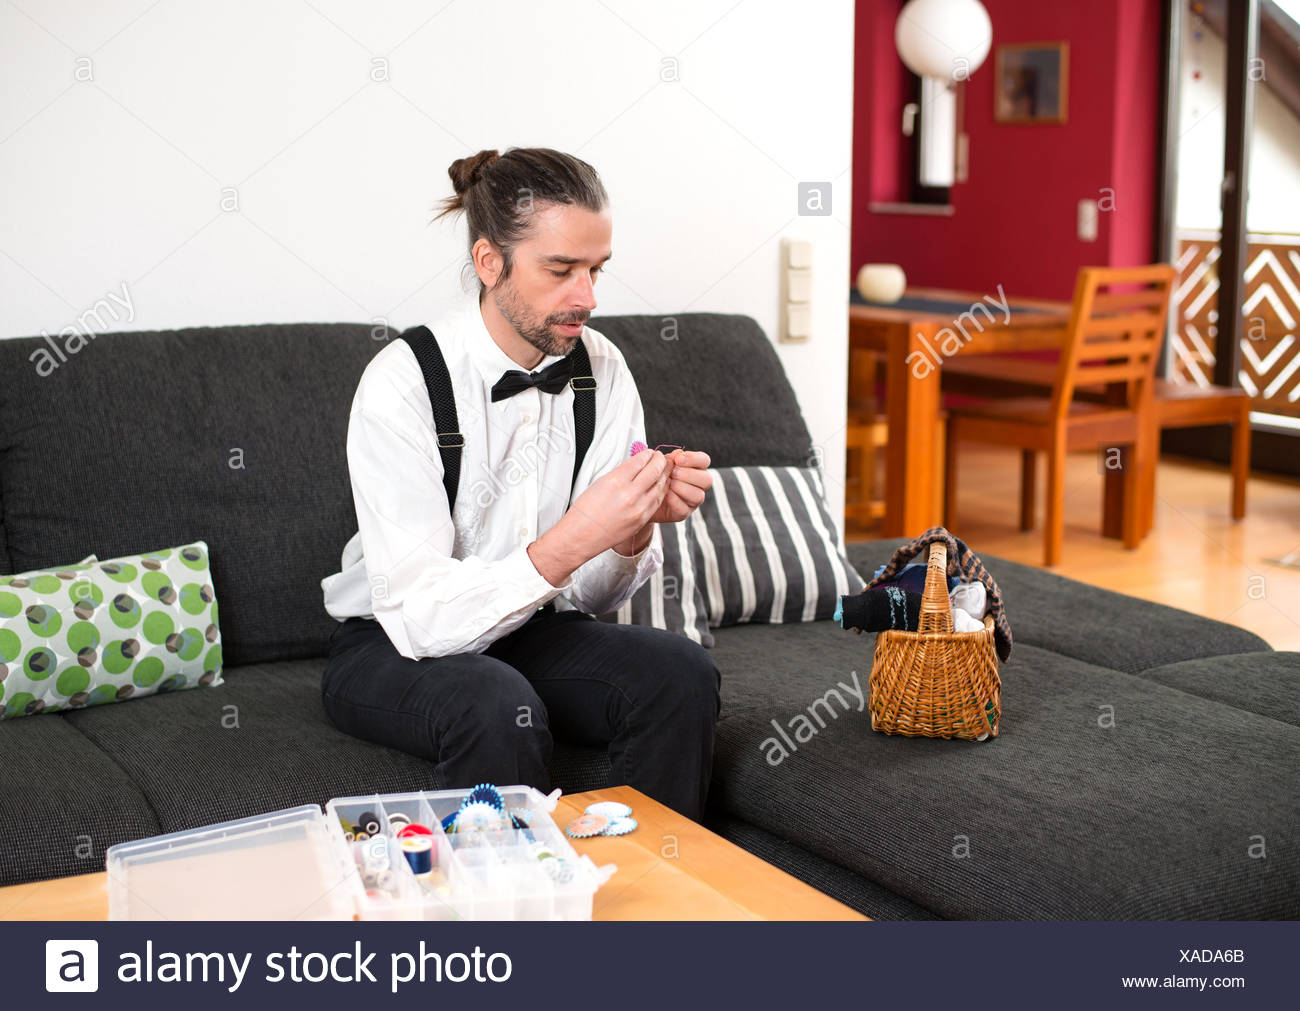 Man White Socks Elegant High Resolution Stock Photography And Images Alamy